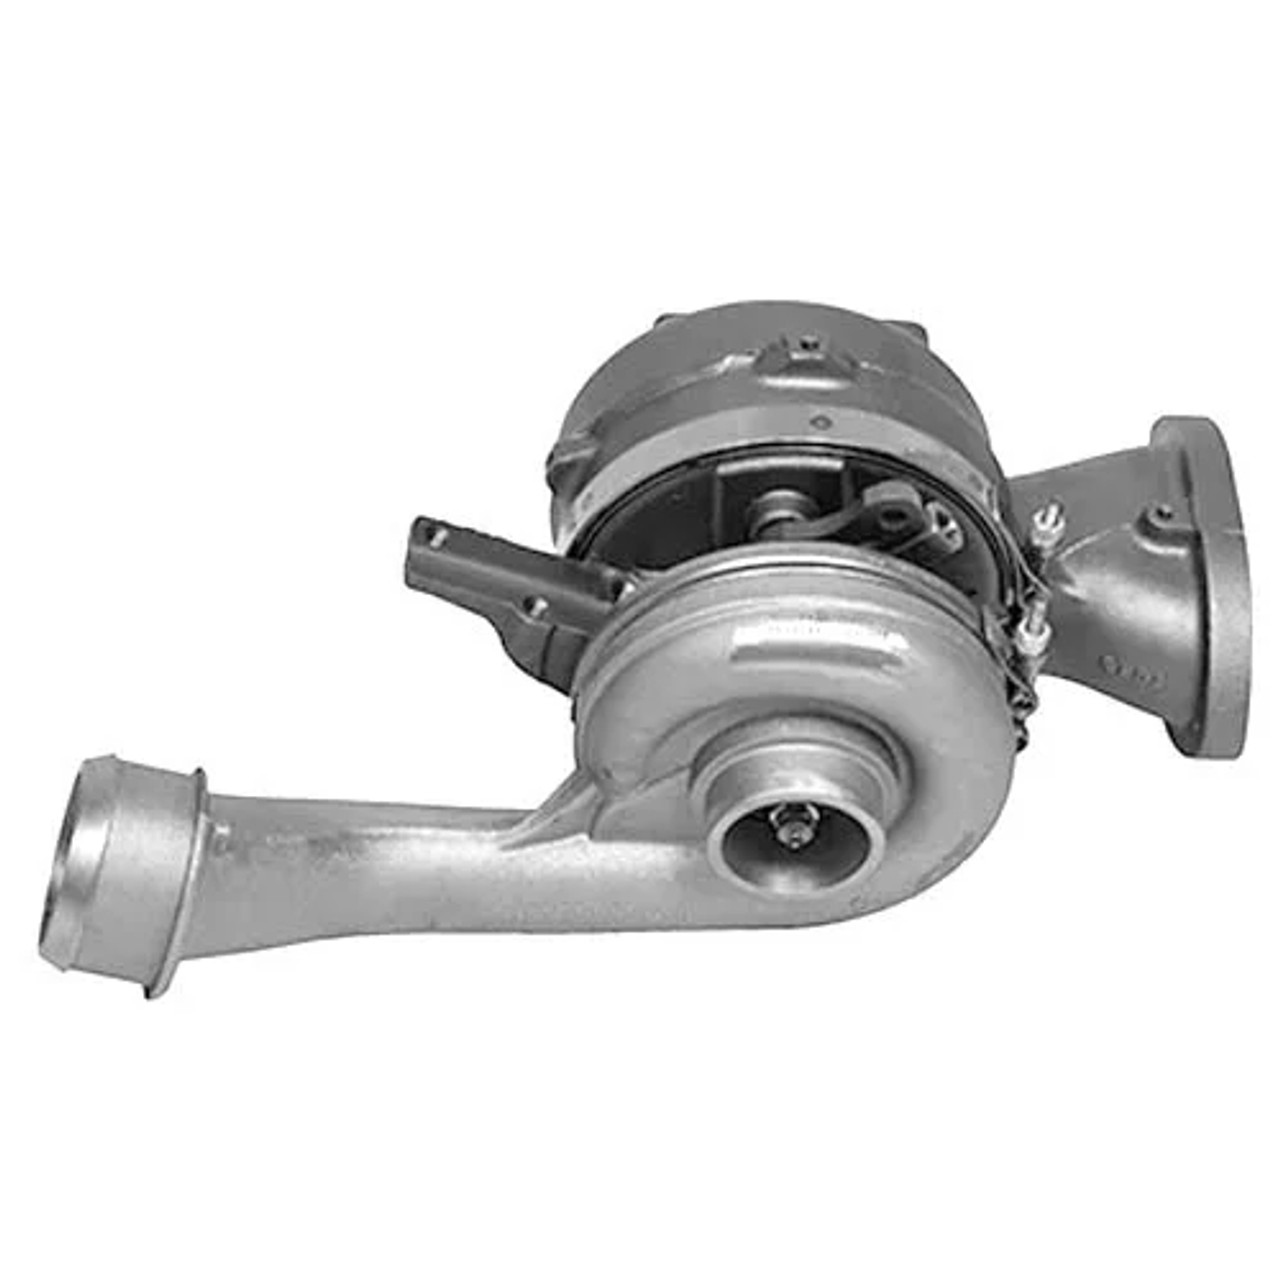 PUREPOWER NEW DIRECT REPLACEMENT HIGH PRESSURE TURBOCHARGER
2008-2010 FORD 6.4L POWERSTROKE- View